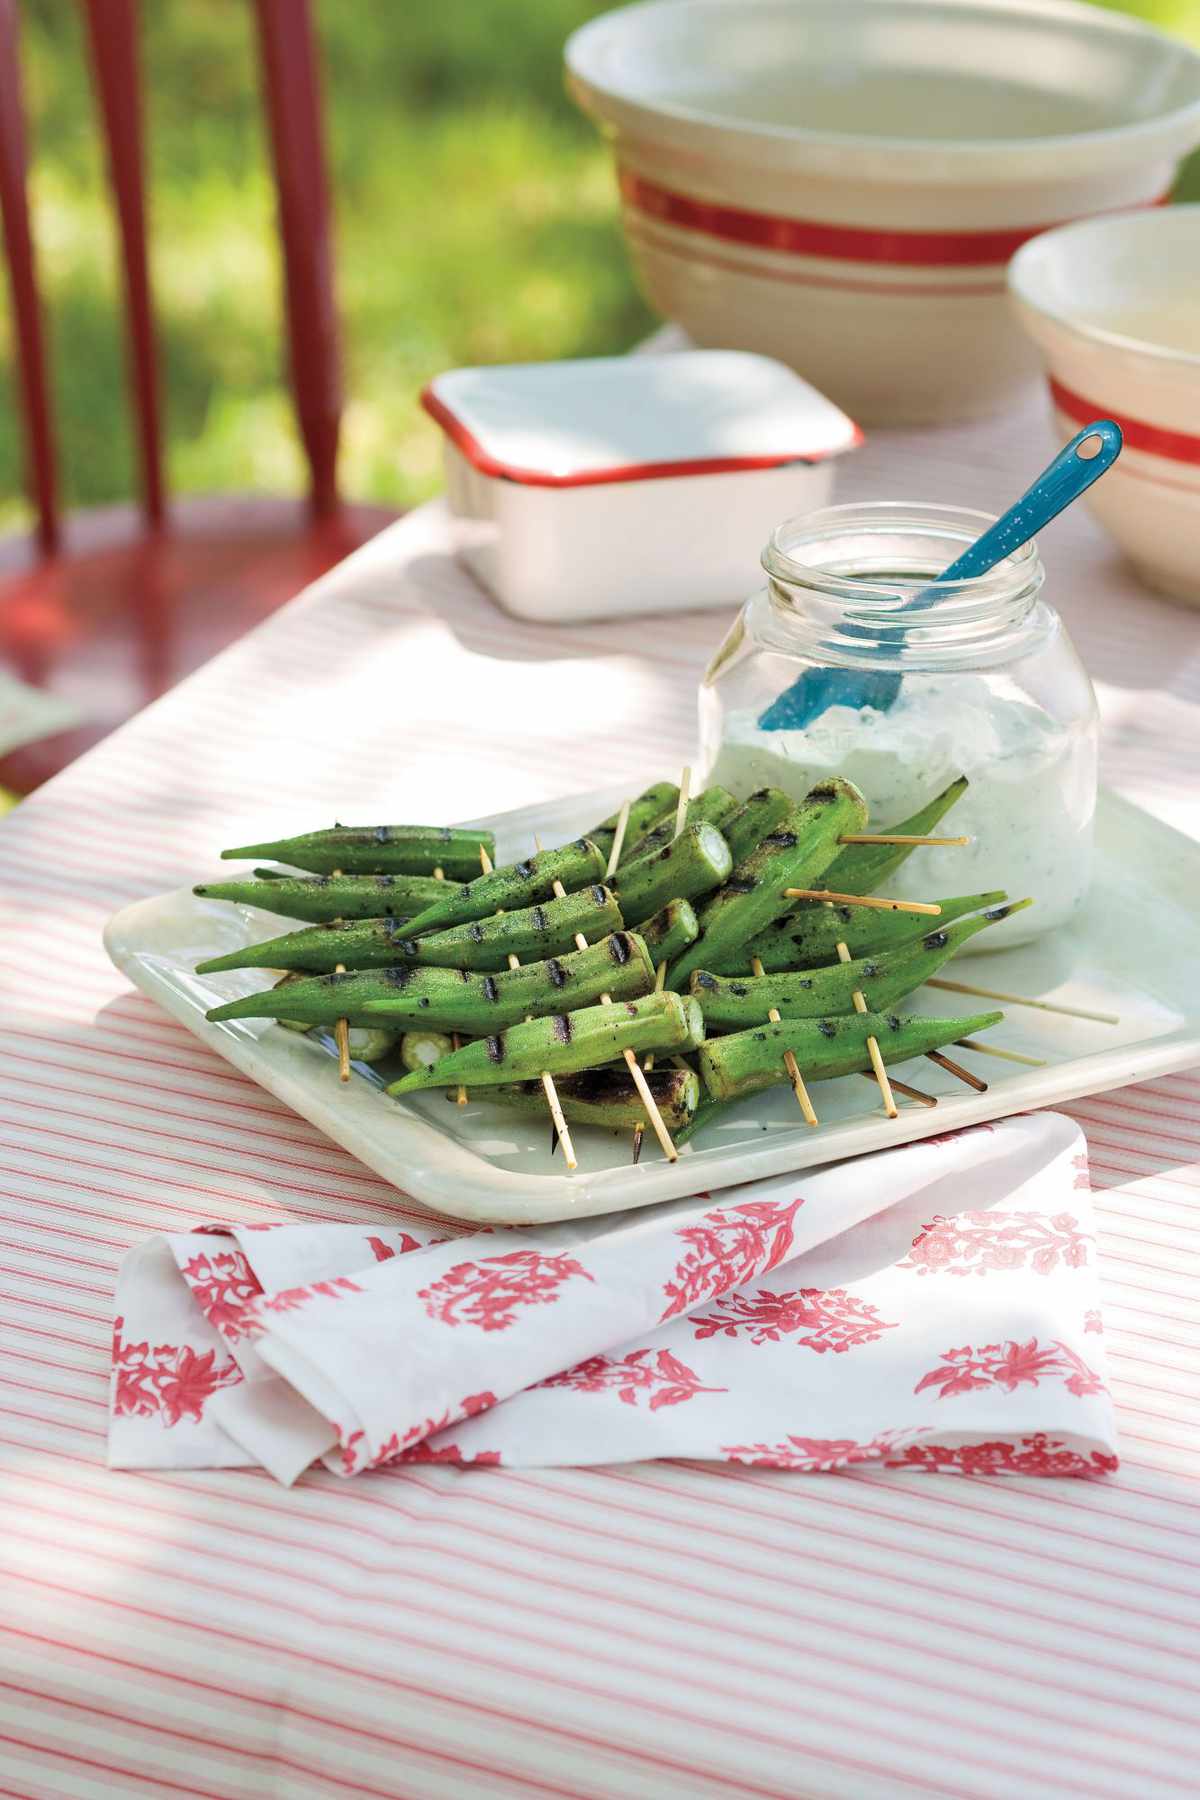 Peppery Grilled Okra with Lemon-Basil Dipping Sauce